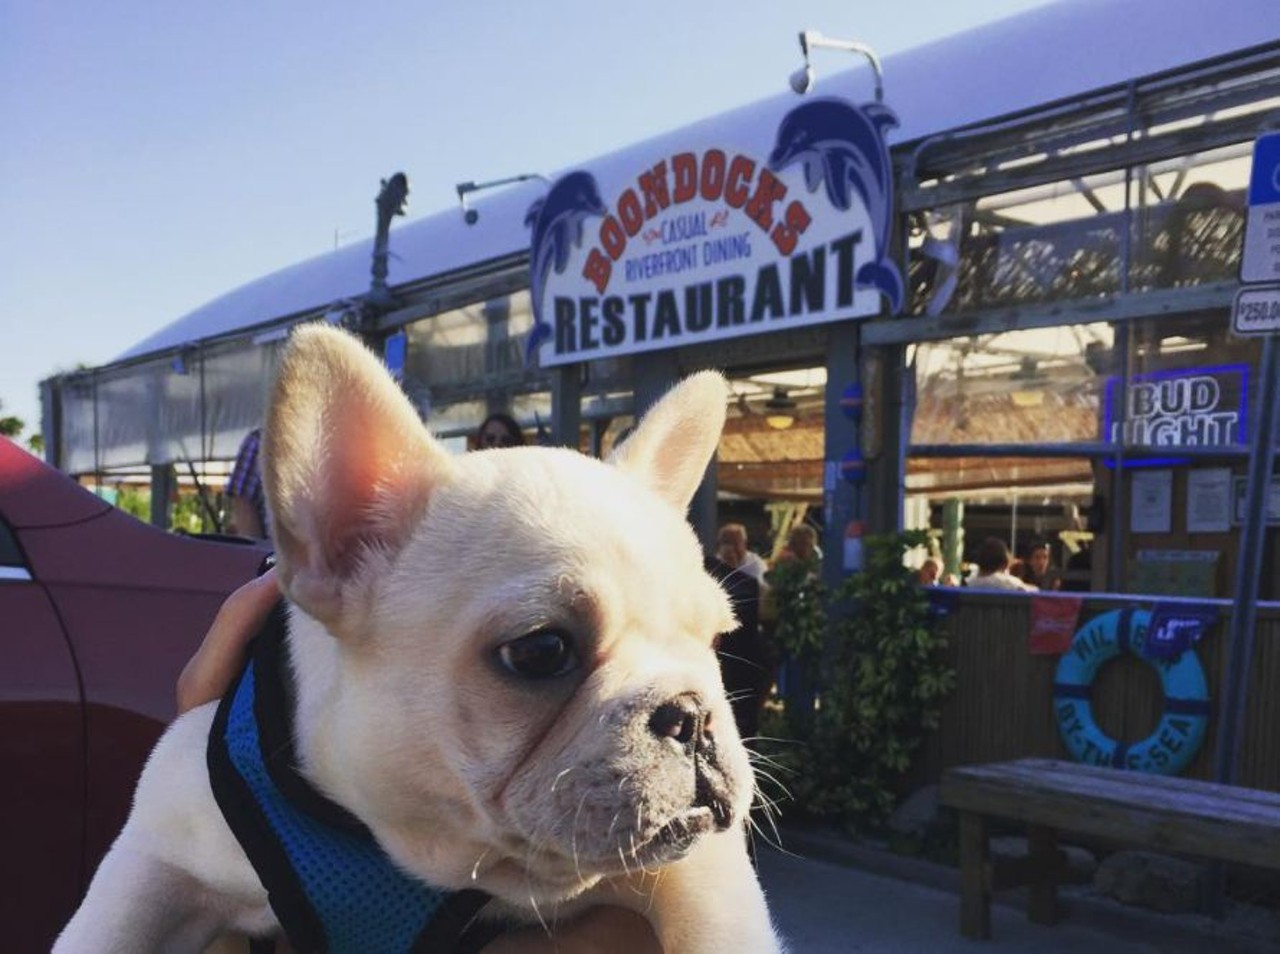 Boondocks Restaurant
3948 S Peninsula Dr, Port Orange, FL 32127
If you can resist finishing up your entire meal, feed the fish at Boondocks - a bar and restaurant ideal for watching the sunset after a long day at the beach down the road. Plus, their patio is pet friendly!
Photo via thorthefrenchbull/Instagram